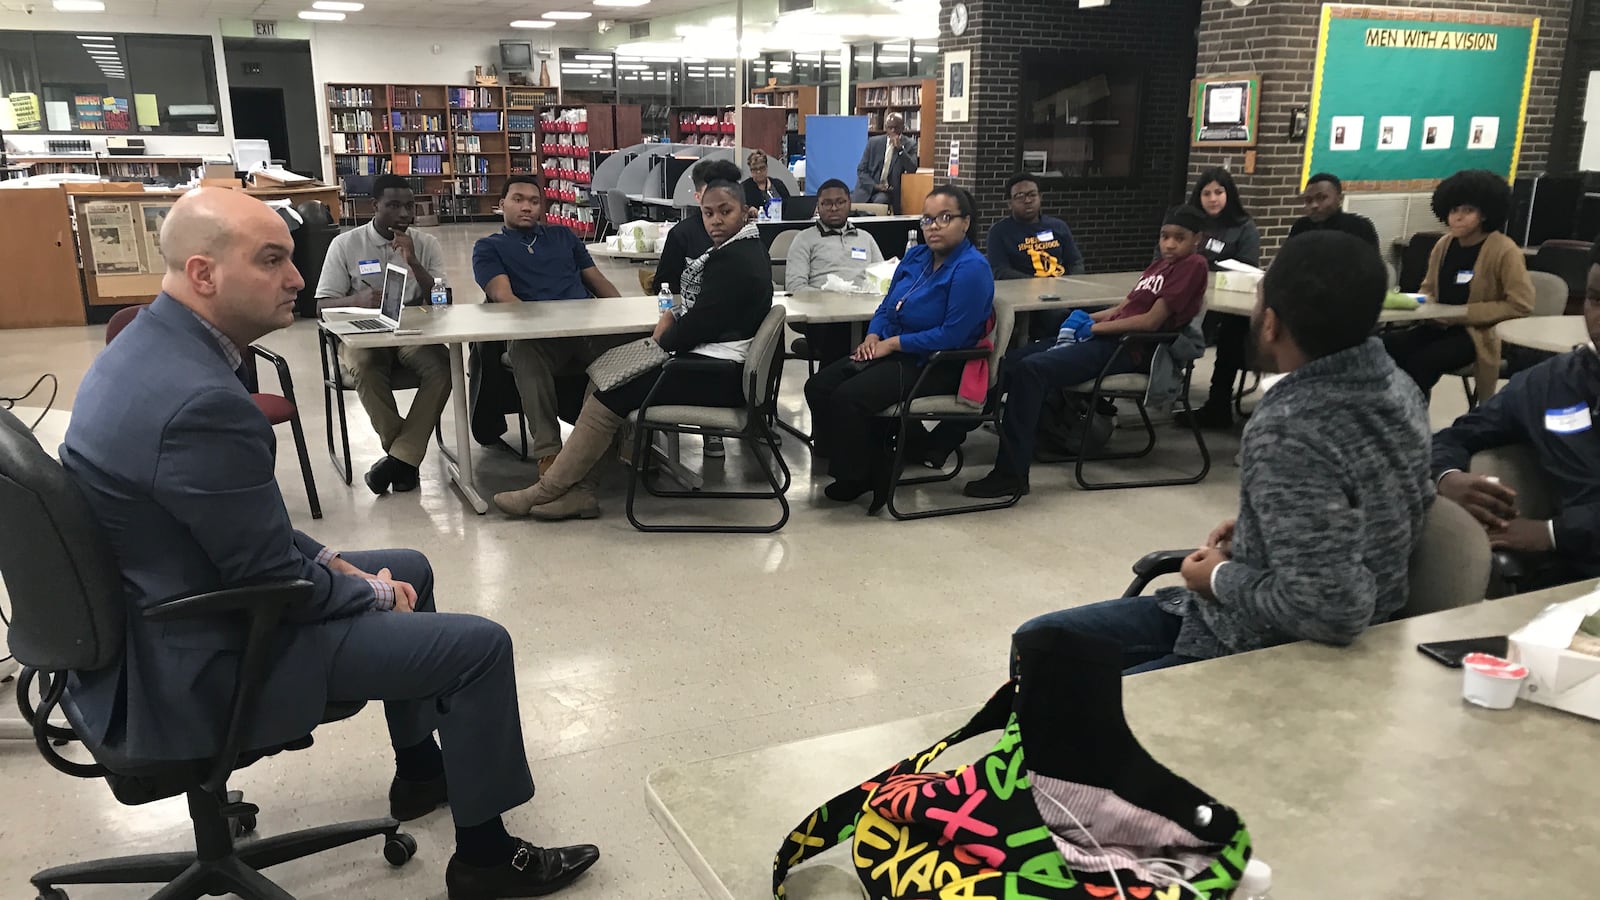 Detroit schools superintendent Nikolai Vitti met with student leaders about their plans to participate Wednesday in a nationwide student walkout to protest gun violence.